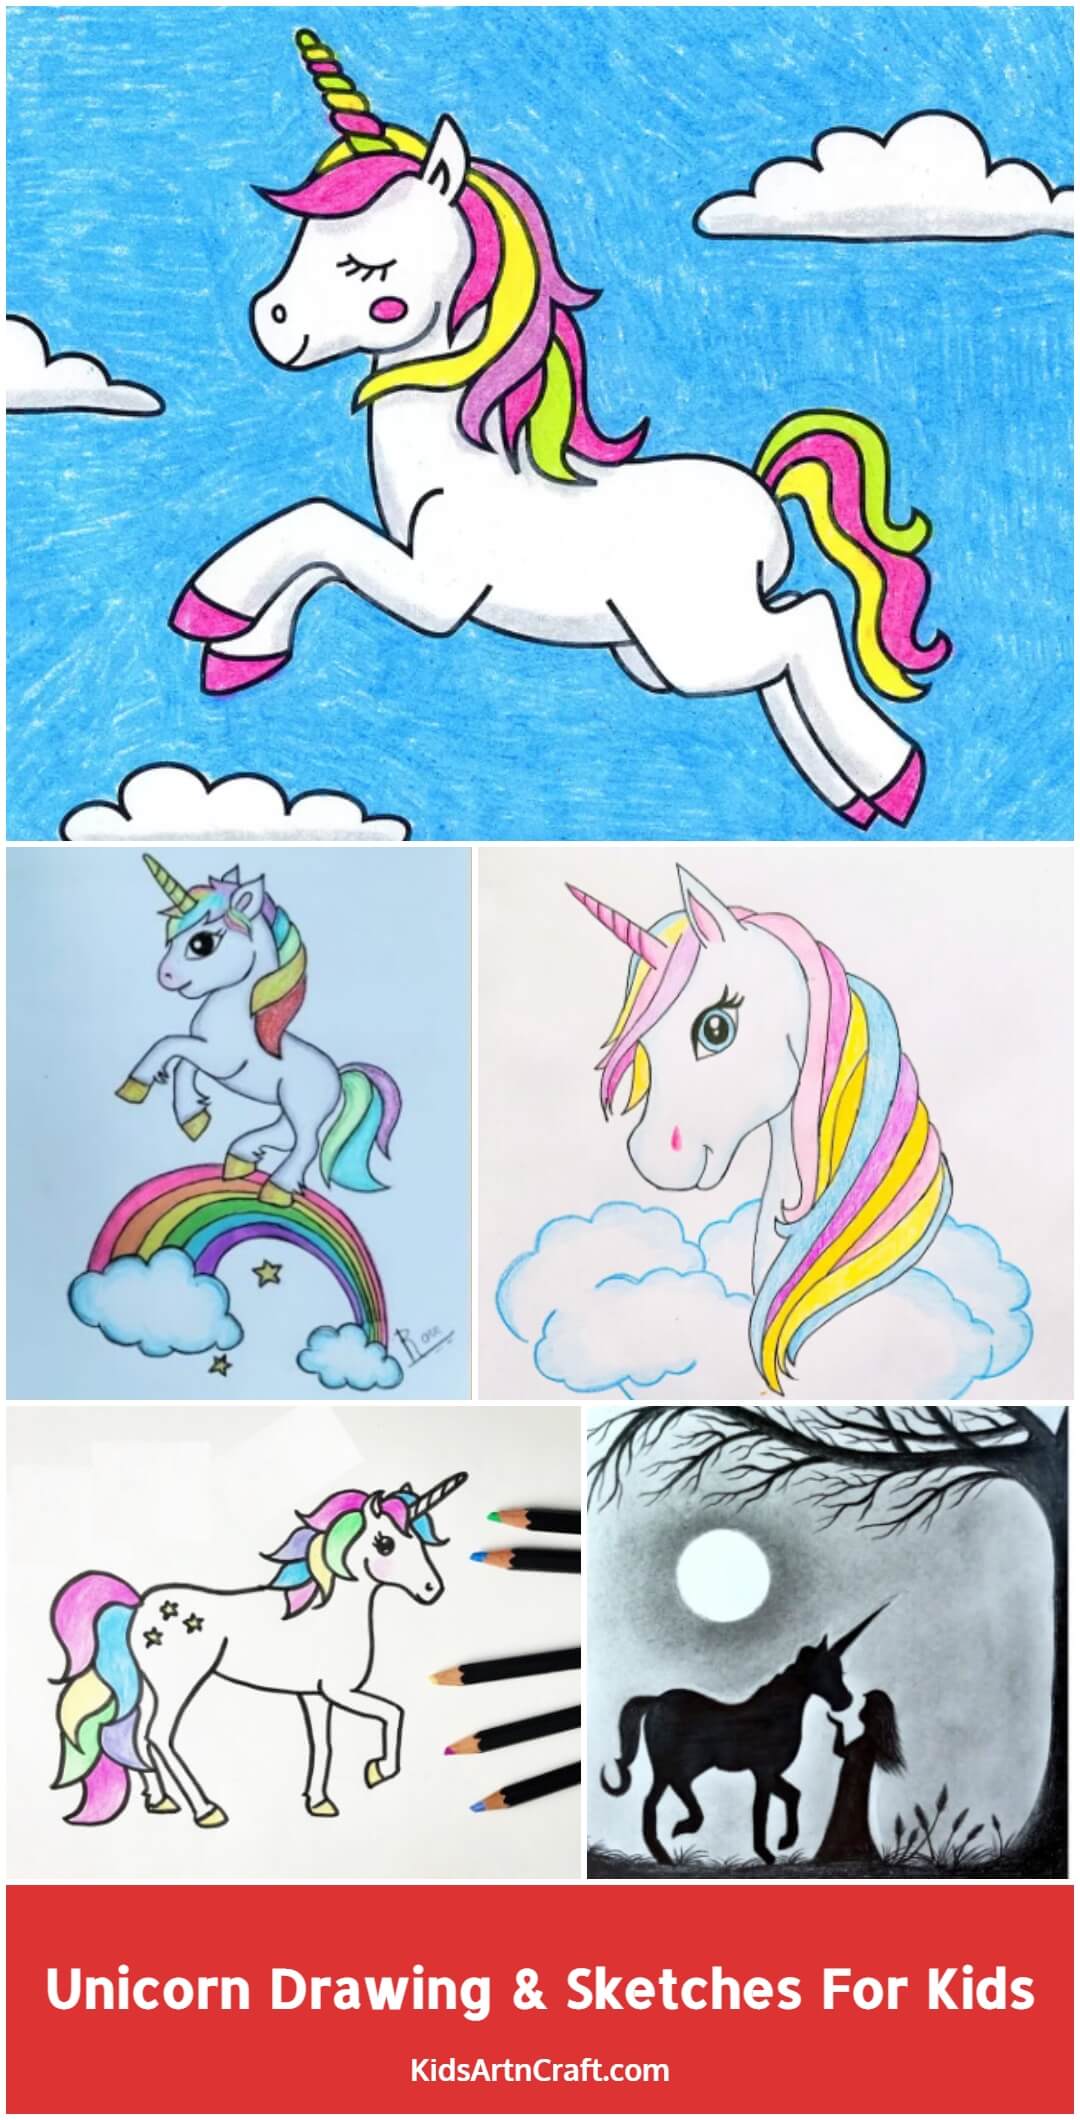 Unicorn Drawing & Sketches for Kids